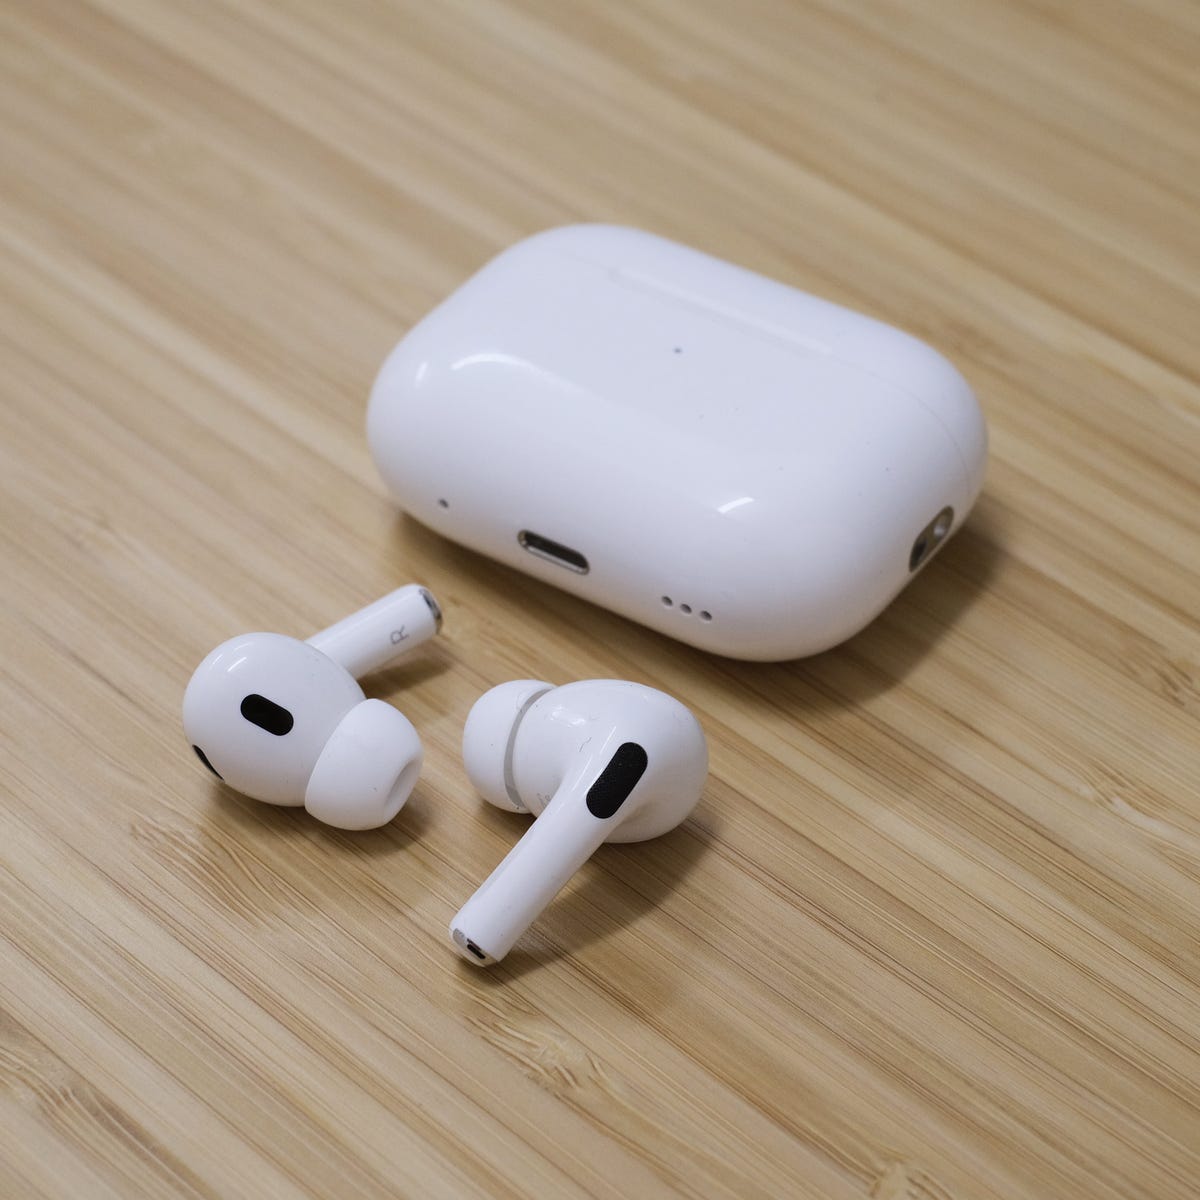 Deal- The new Apple AirPods Pro are 20% cheaper during the Memorial Day